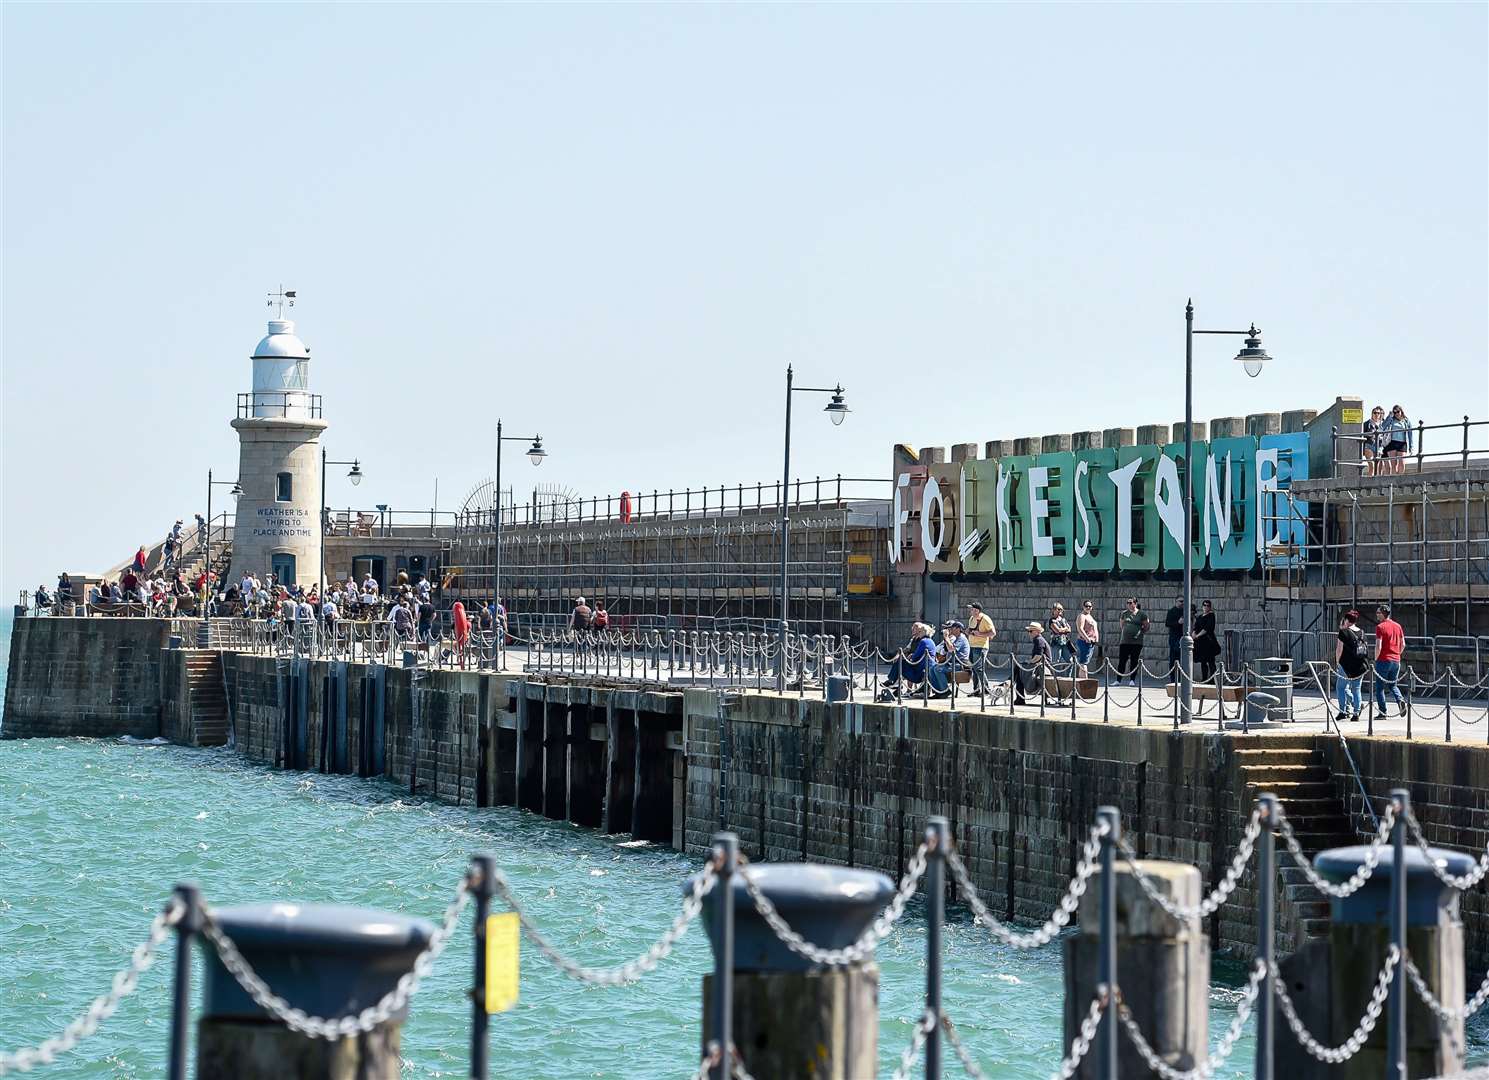 Folkestone Harbour Arm gets more than two million “visits” per year. Picture: Alan Langley